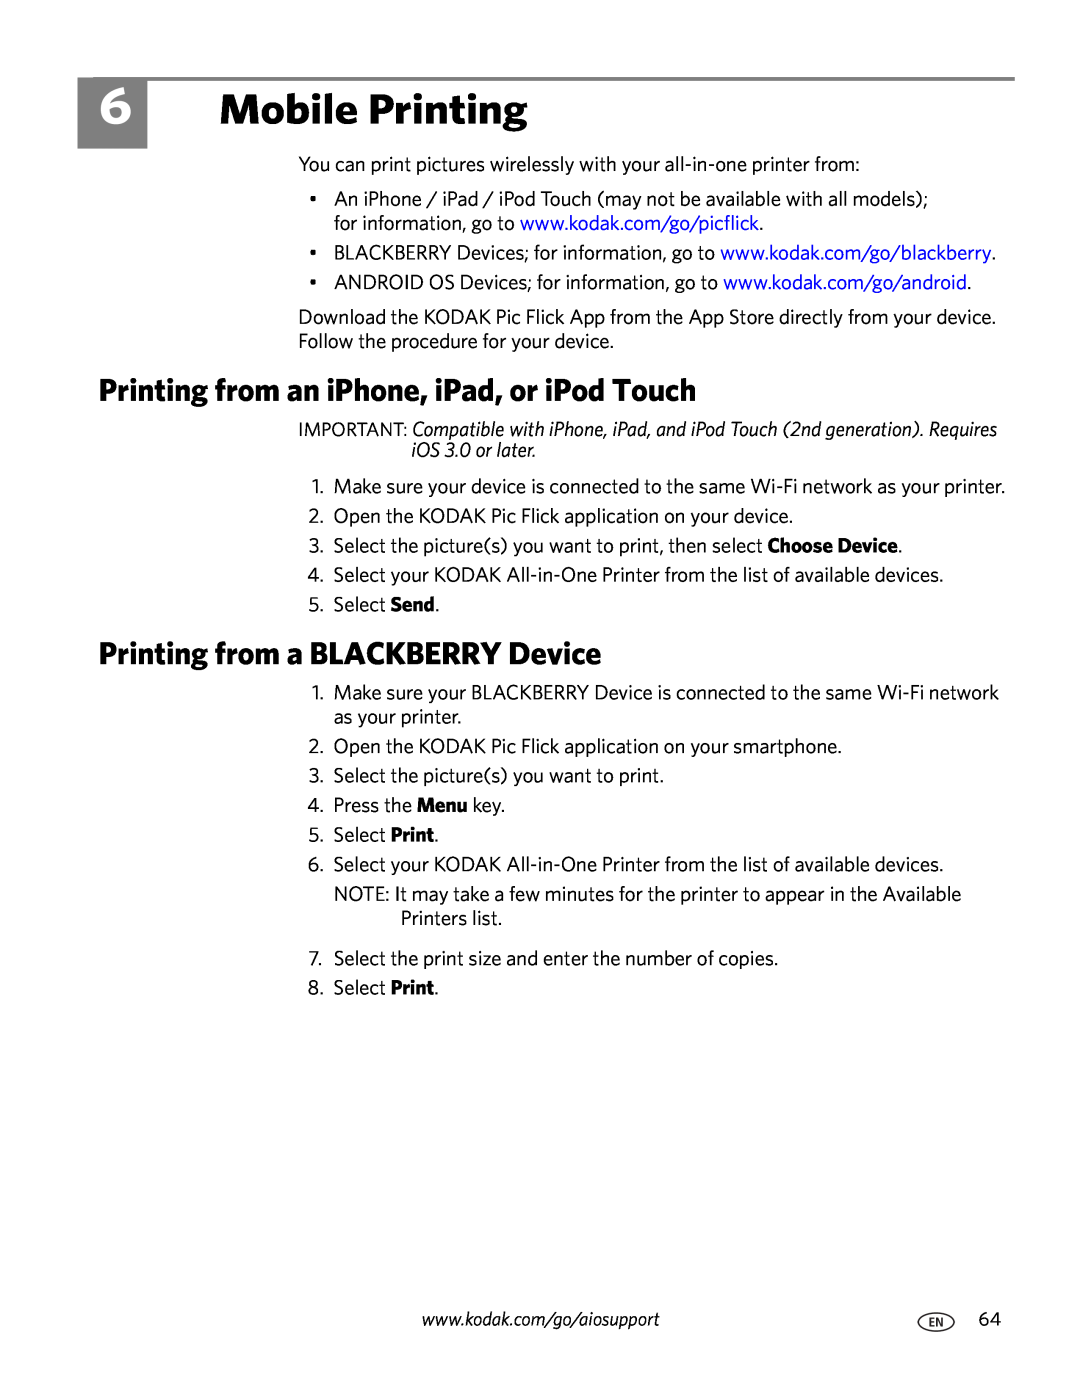 Kodak 7.1 manual Mobile Printing, Printing from an iPhone, iPad, or iPod Touch, Printing from a BLACKBERRY Device 